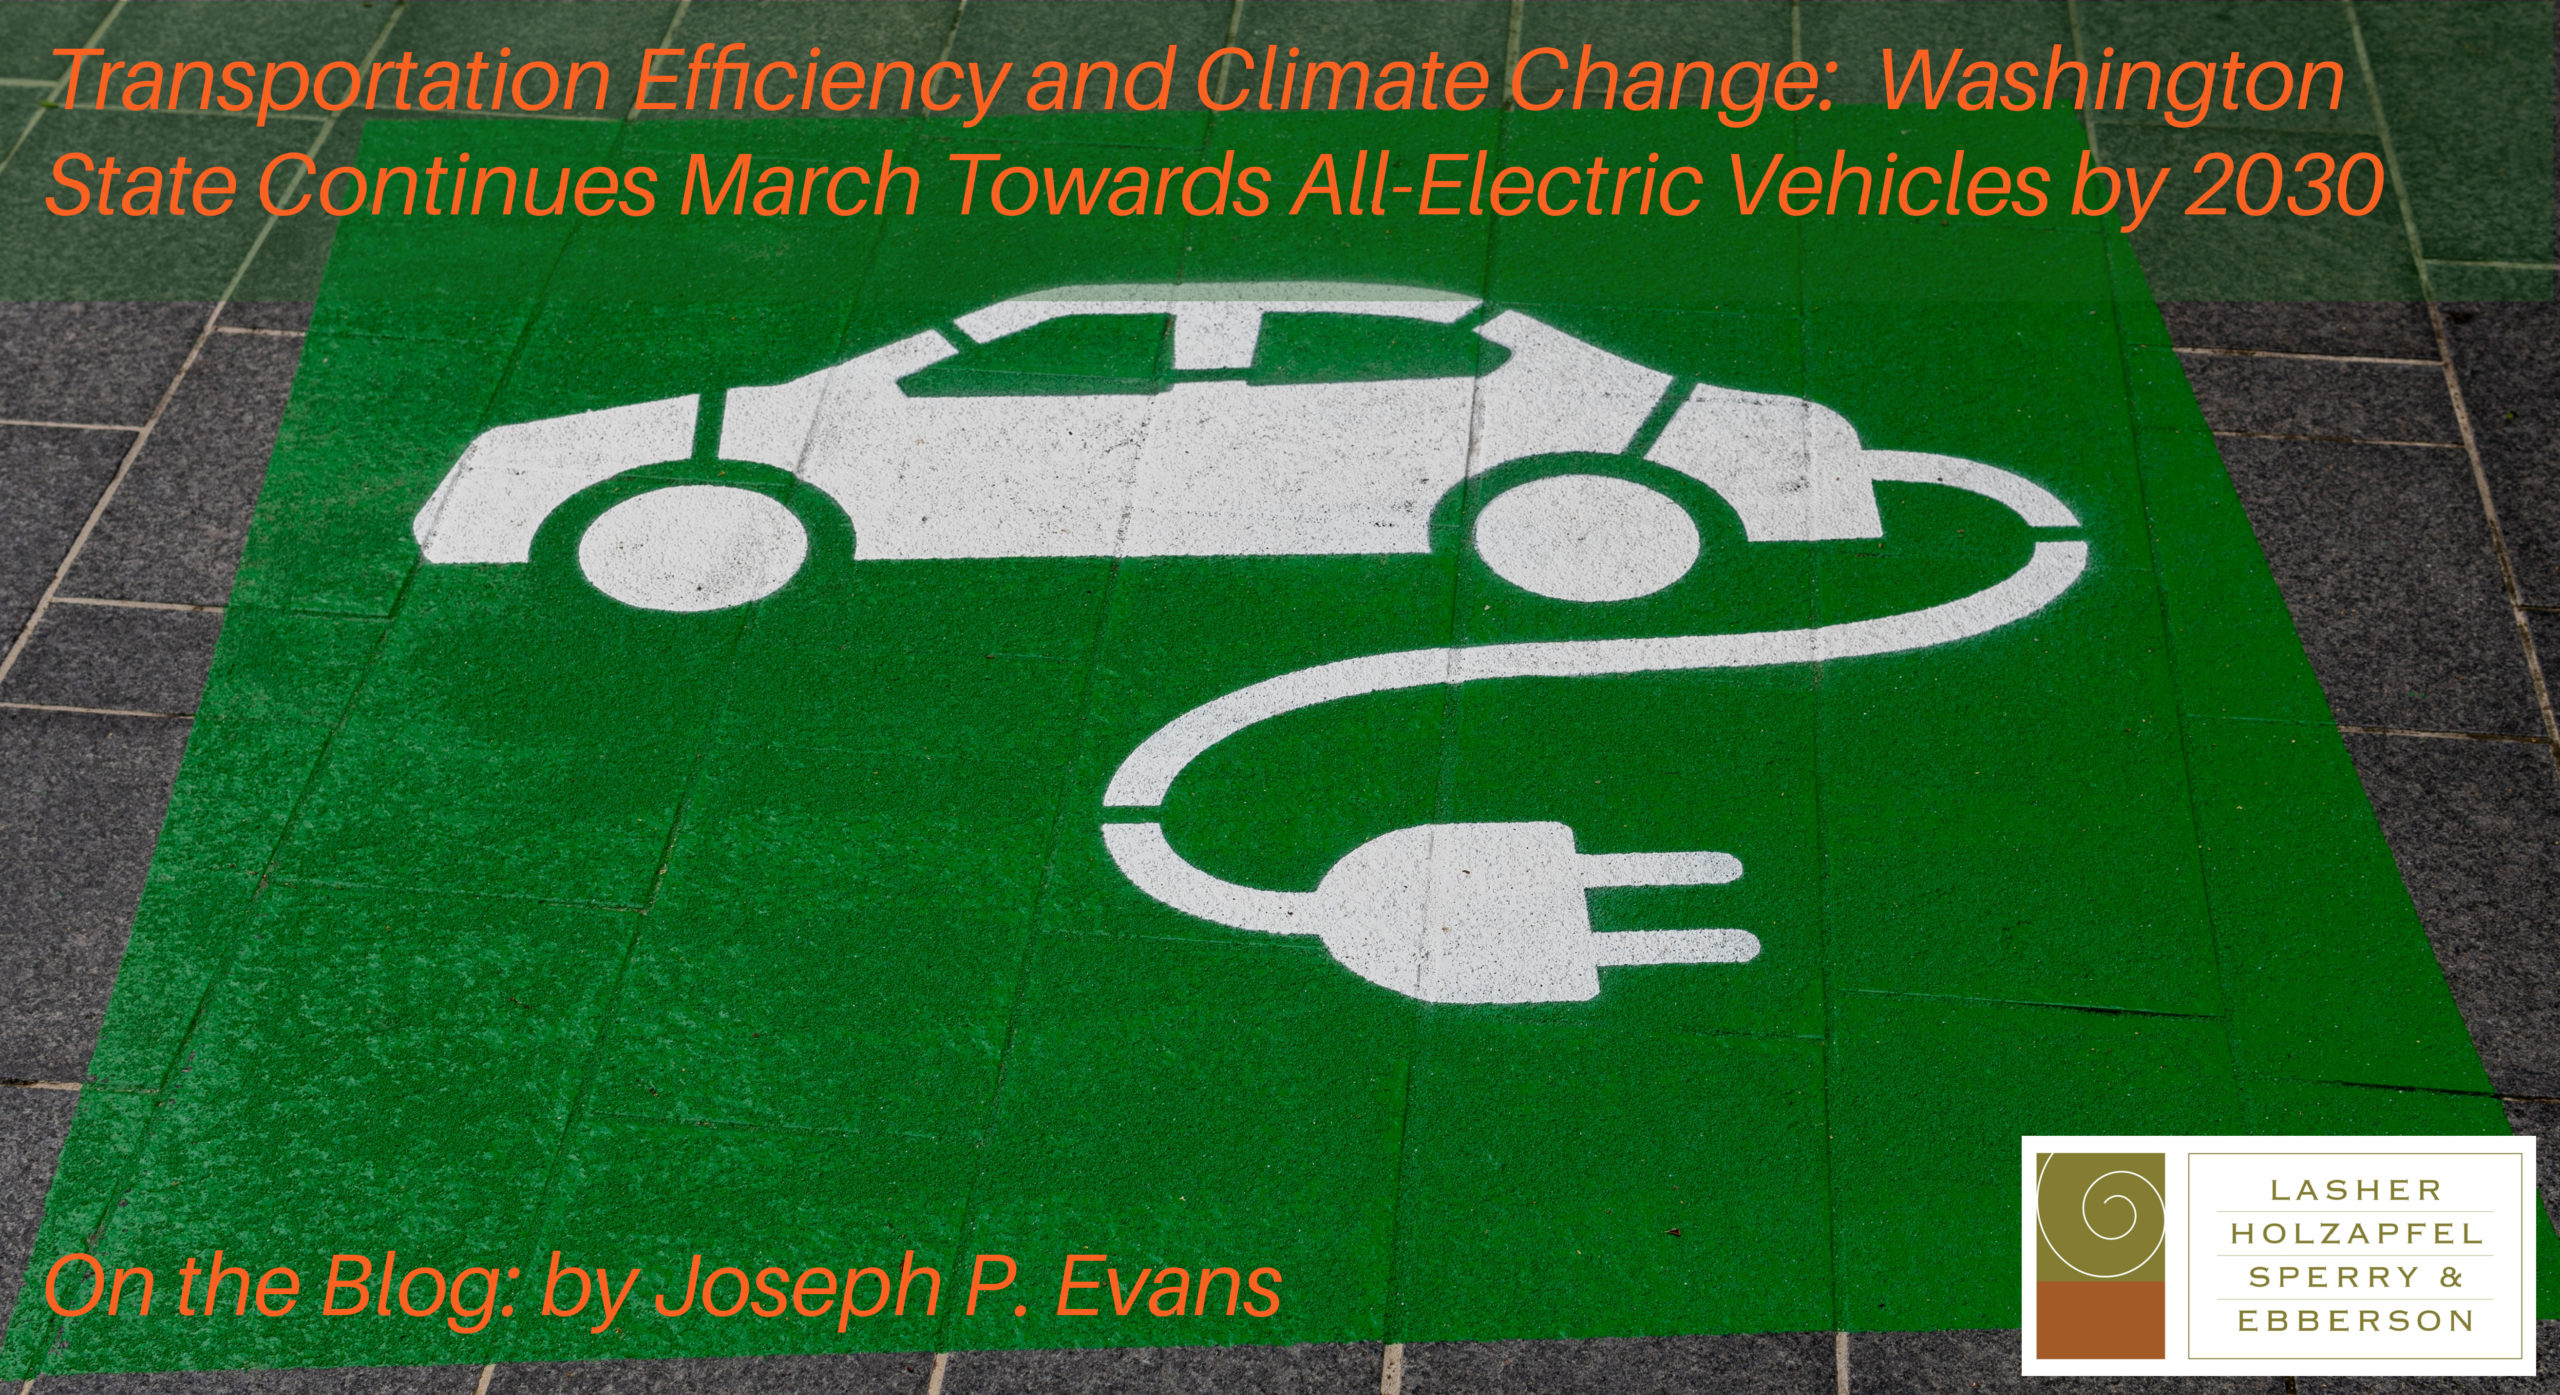 Transportation Efficiency and Climate Change:  Washington State Continues March Towards All-Electric Vehicles by 2030